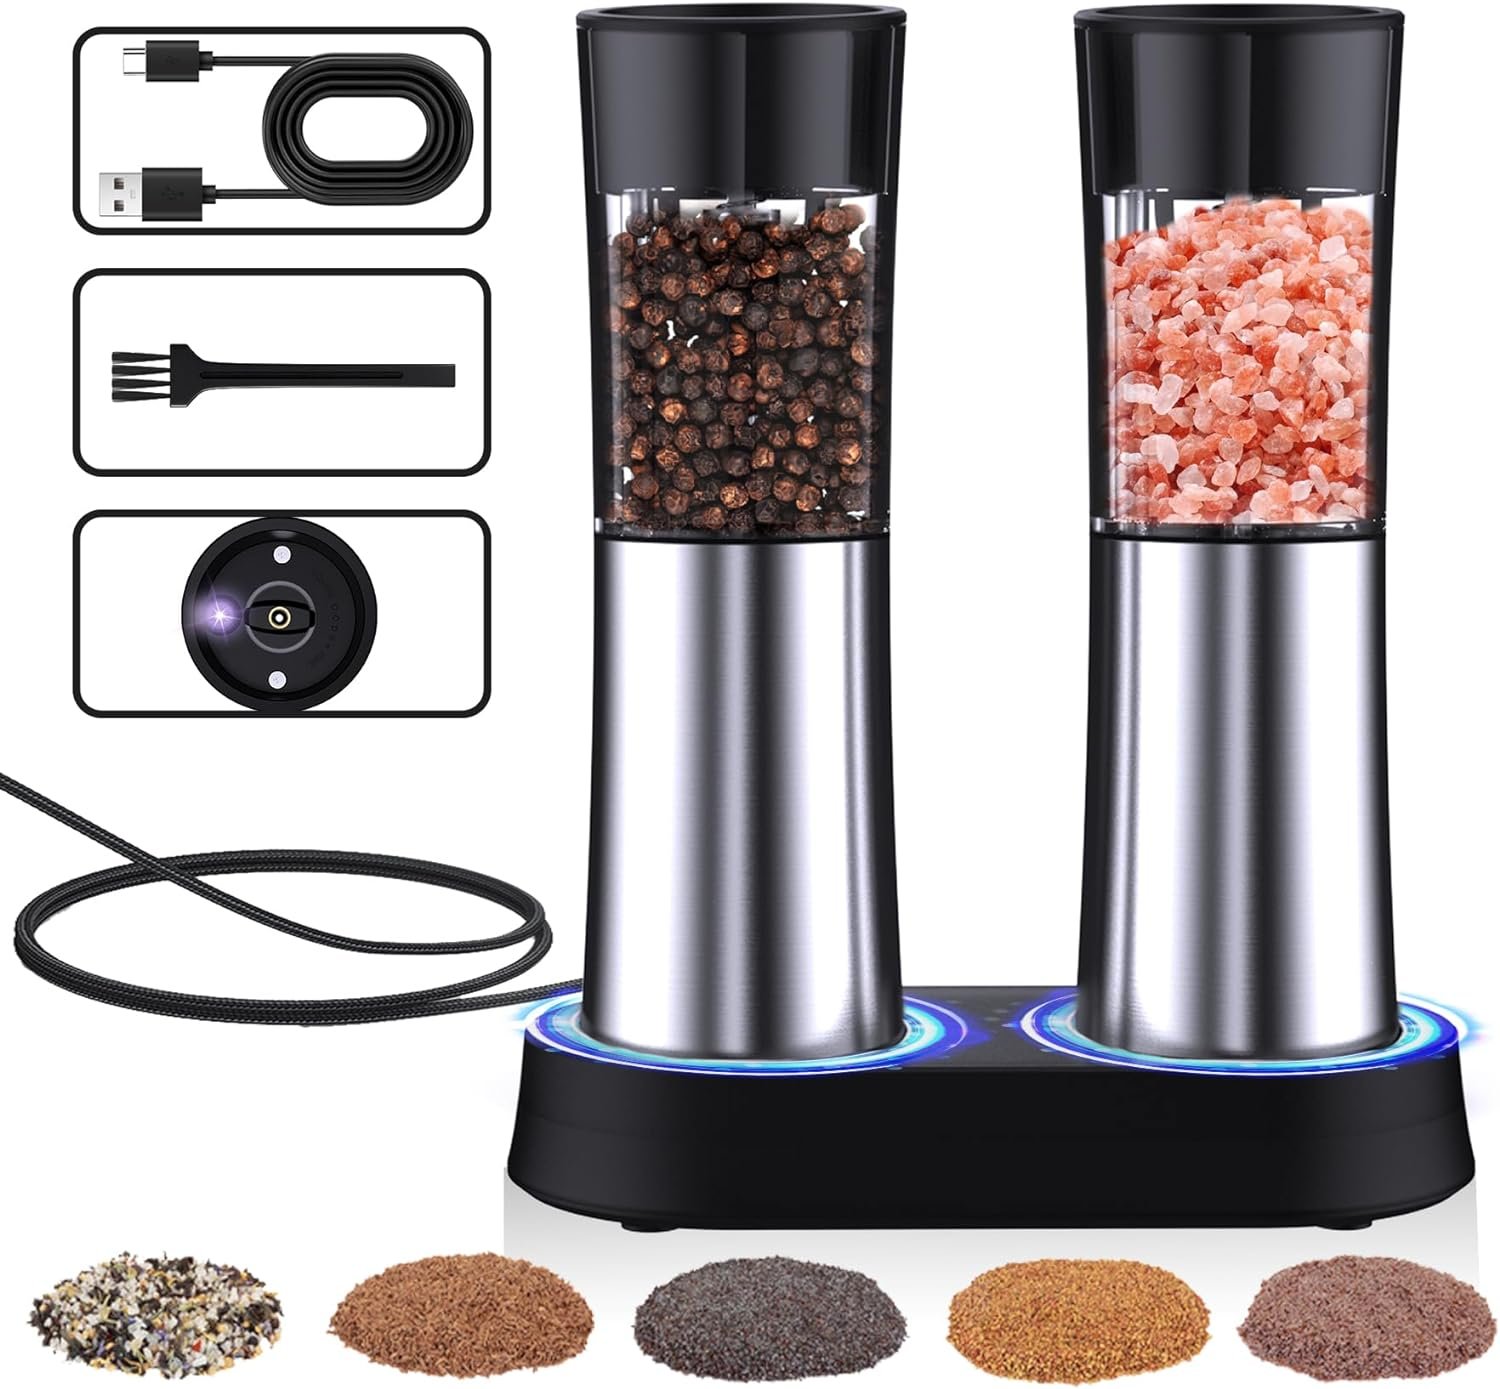 Sobtoe Newest Gravity Electric Salt and Pepper Grinder Set, Rechargeable Automatic Salt and Pepper Mill Grinder with Adjustable Coarseness, Electric Salt and pepper Shakers, LED Light, (2 Packs)